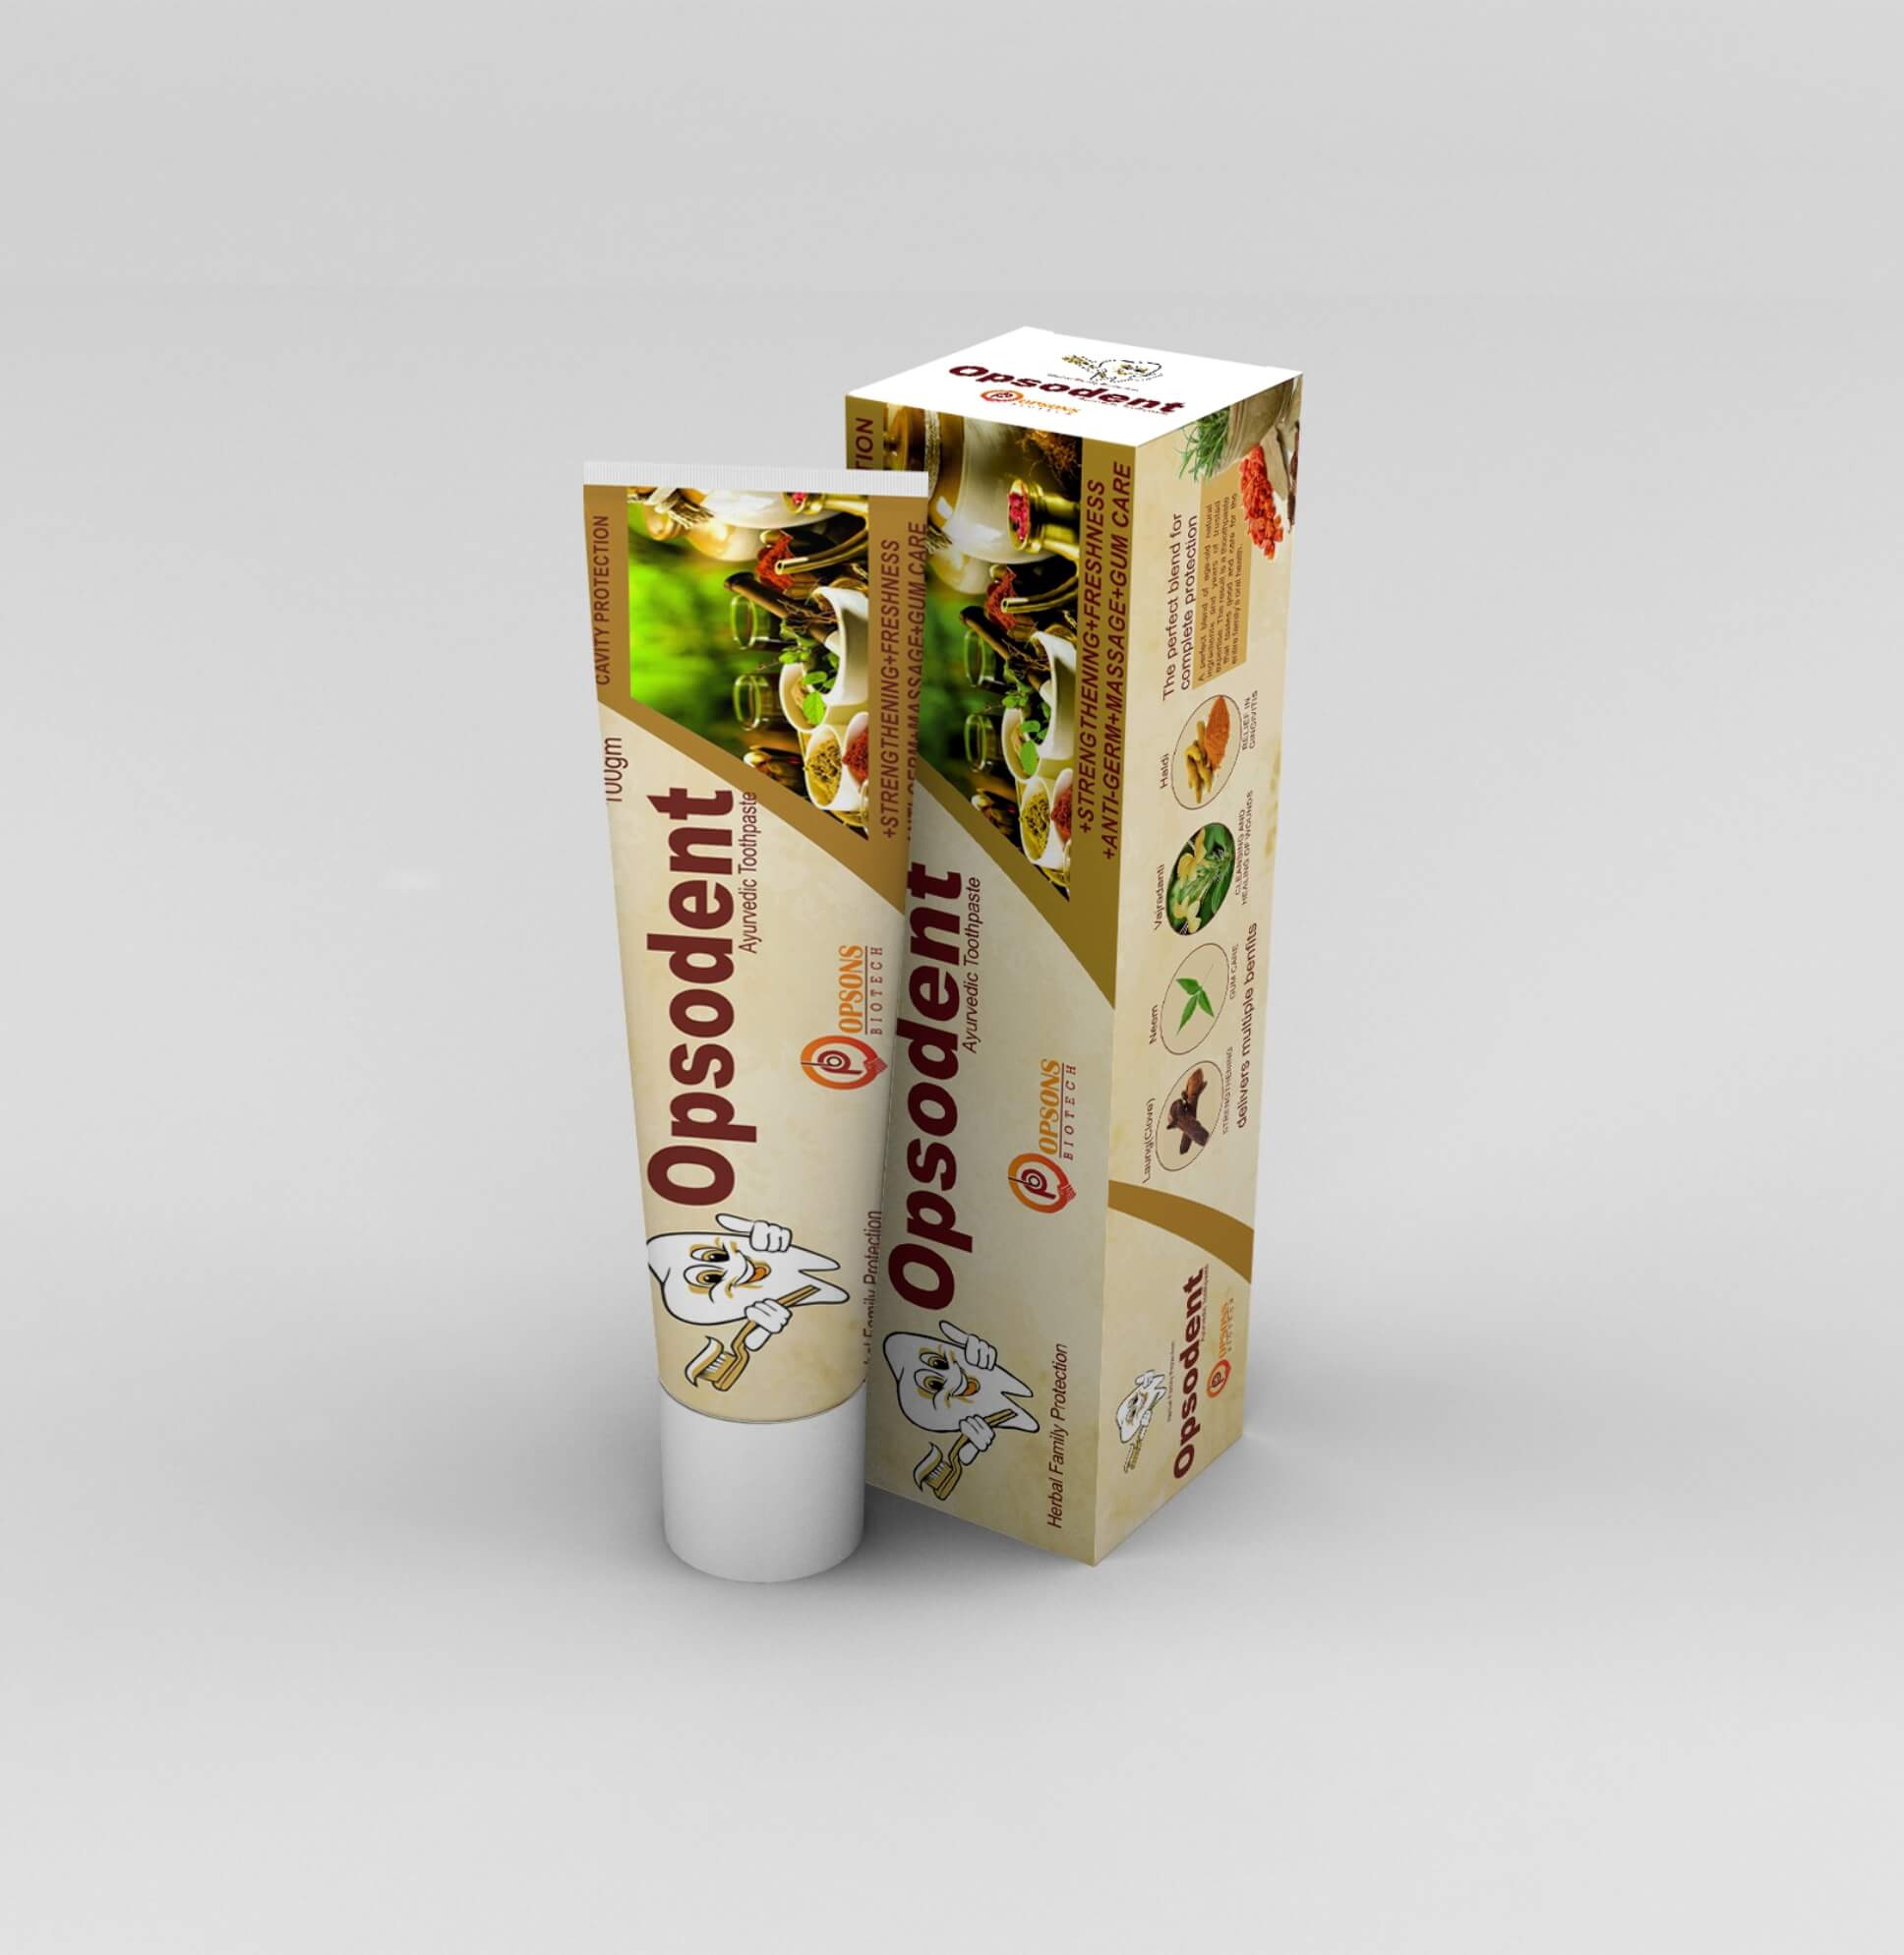 Product Name: Opsodent shampoo, Compositions of Opsodent shampoo are Opsodent - Opsons Biotech